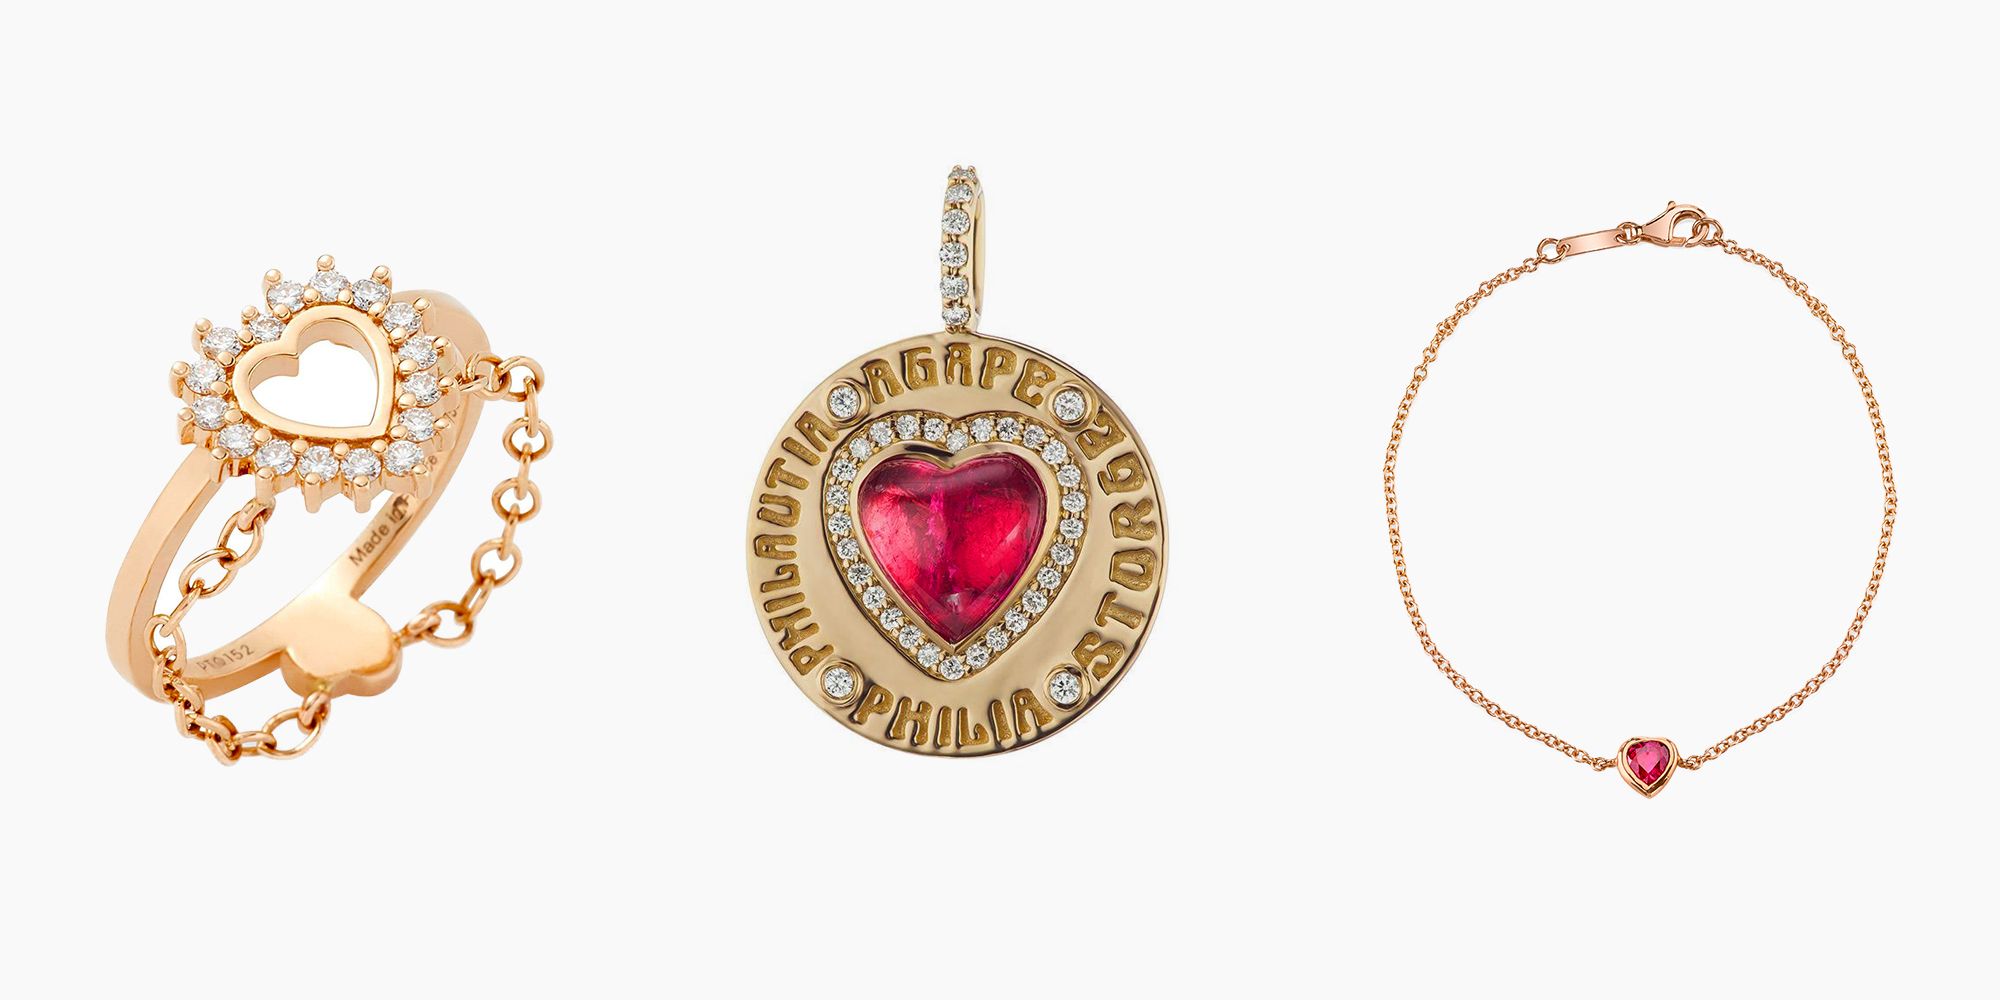 Our Favorite Fine Jewelry Releases of 2021! - Ace Jewelers Magazine